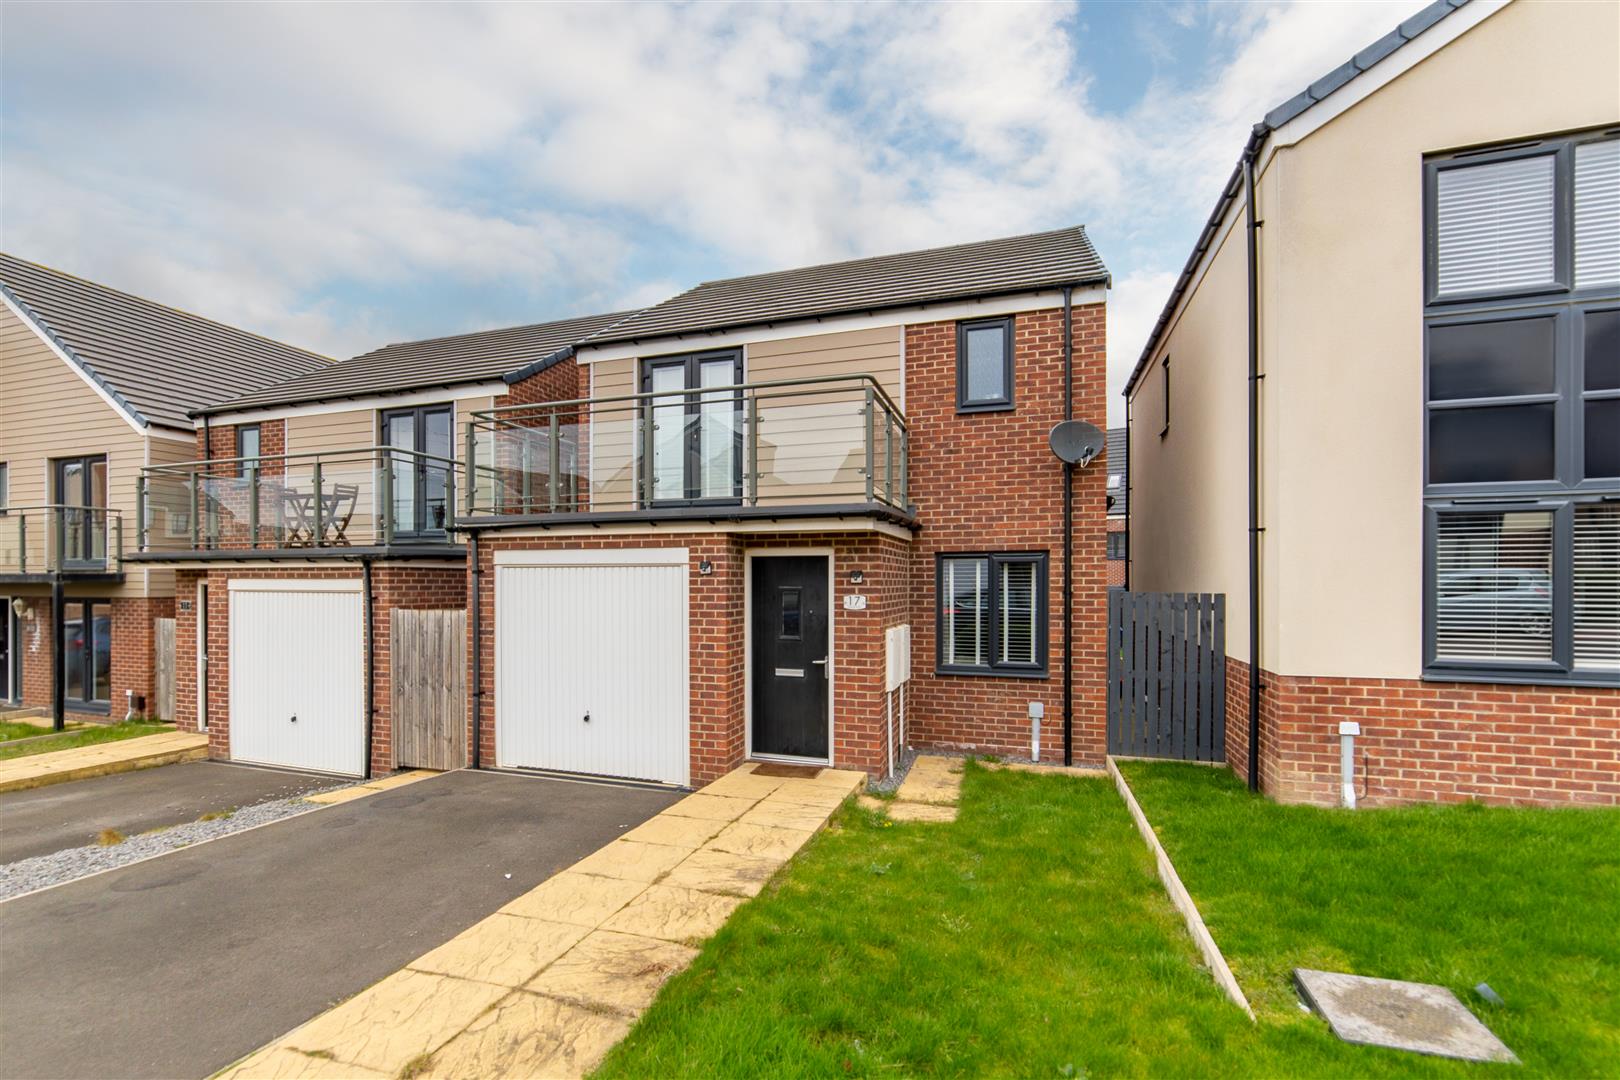 3 bed detached house for sale in Osprey Walk, Newcastle Upon Tyne, NE13